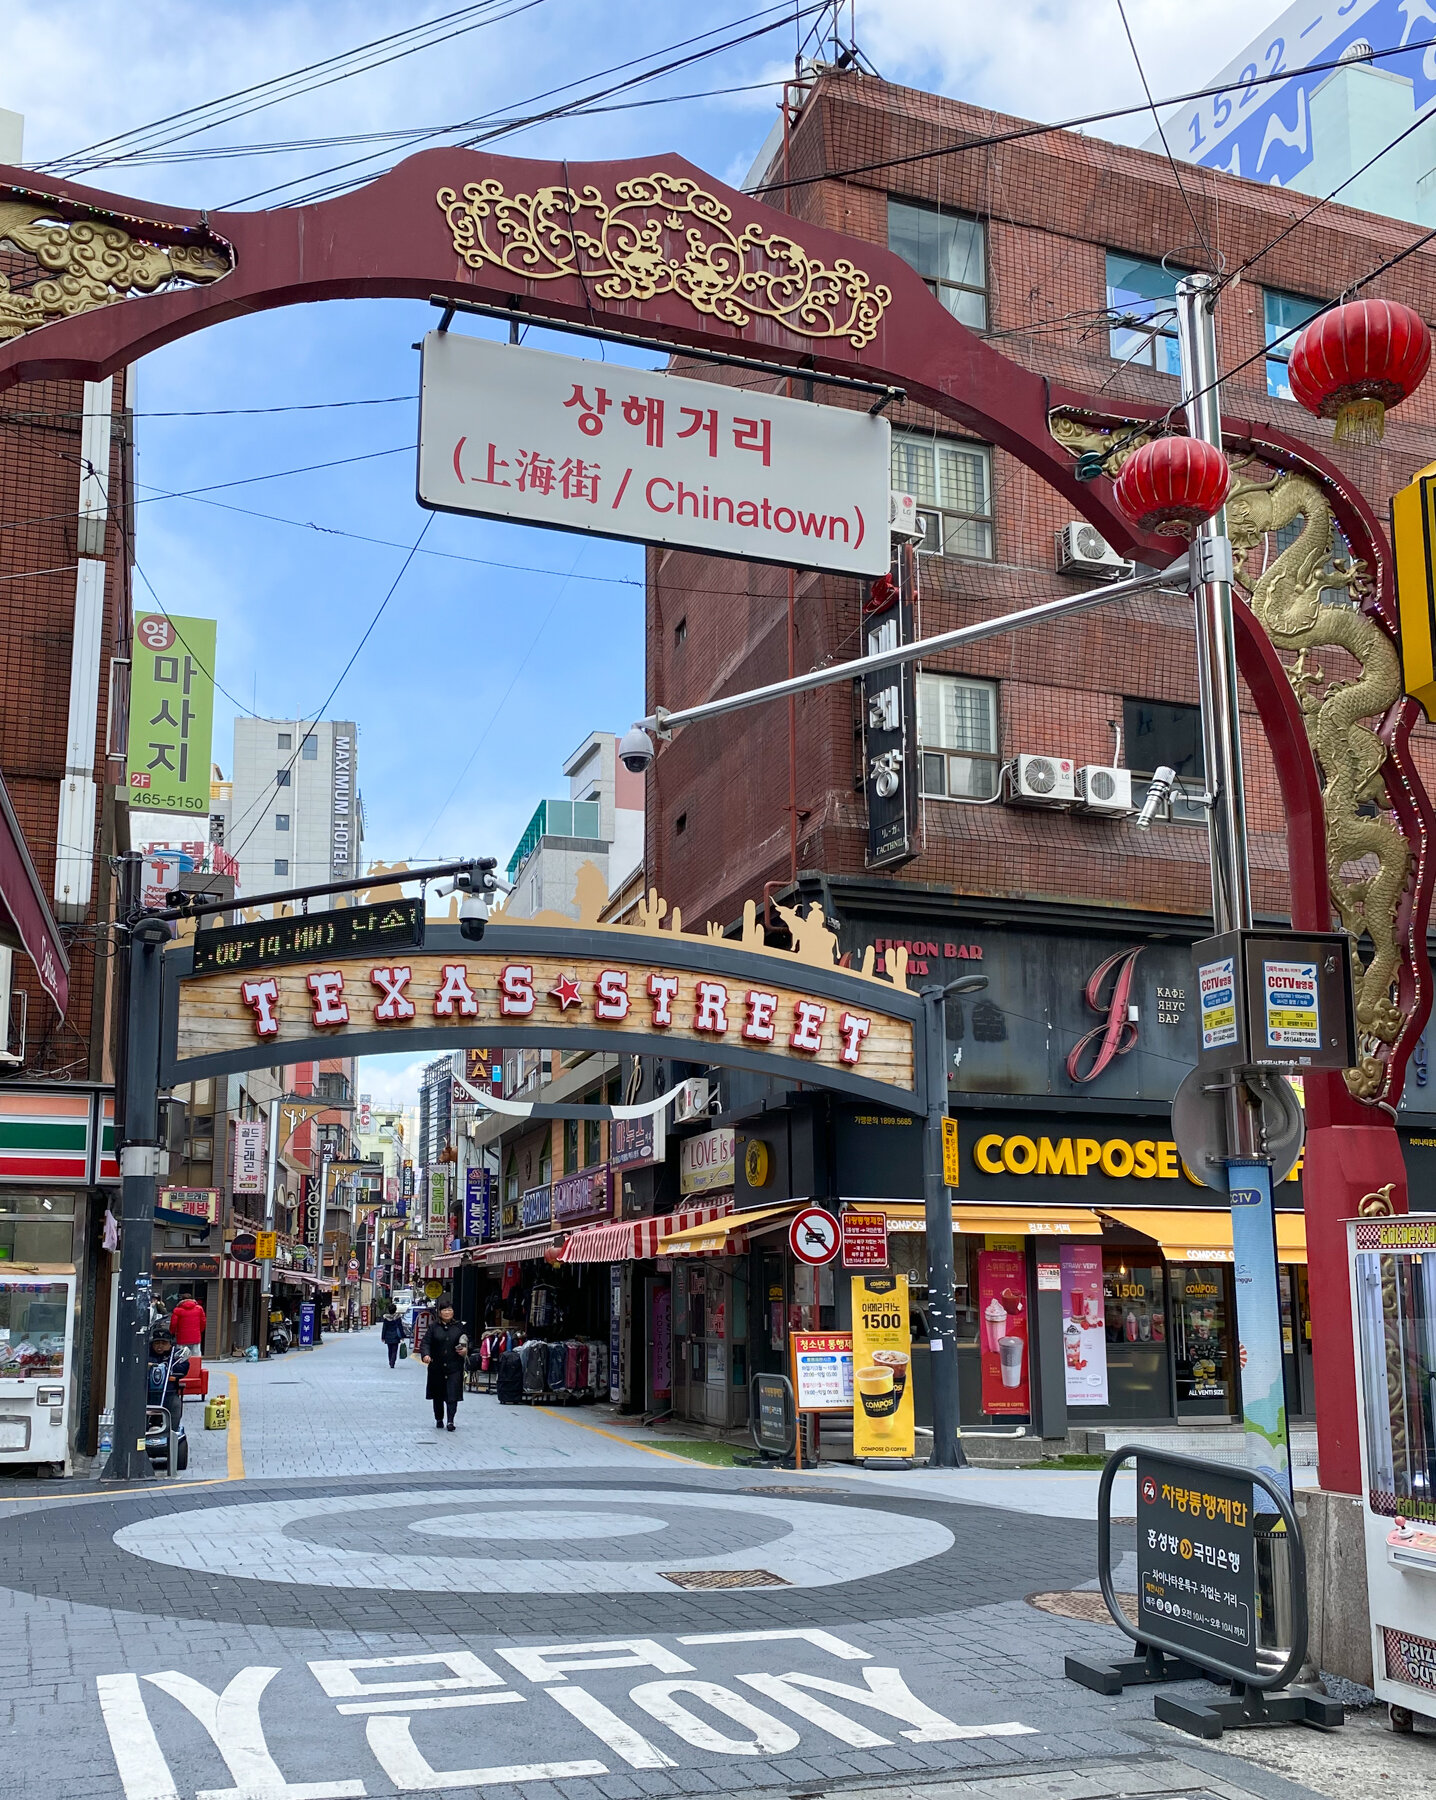 Oddly Chinatown turns into Texas Street